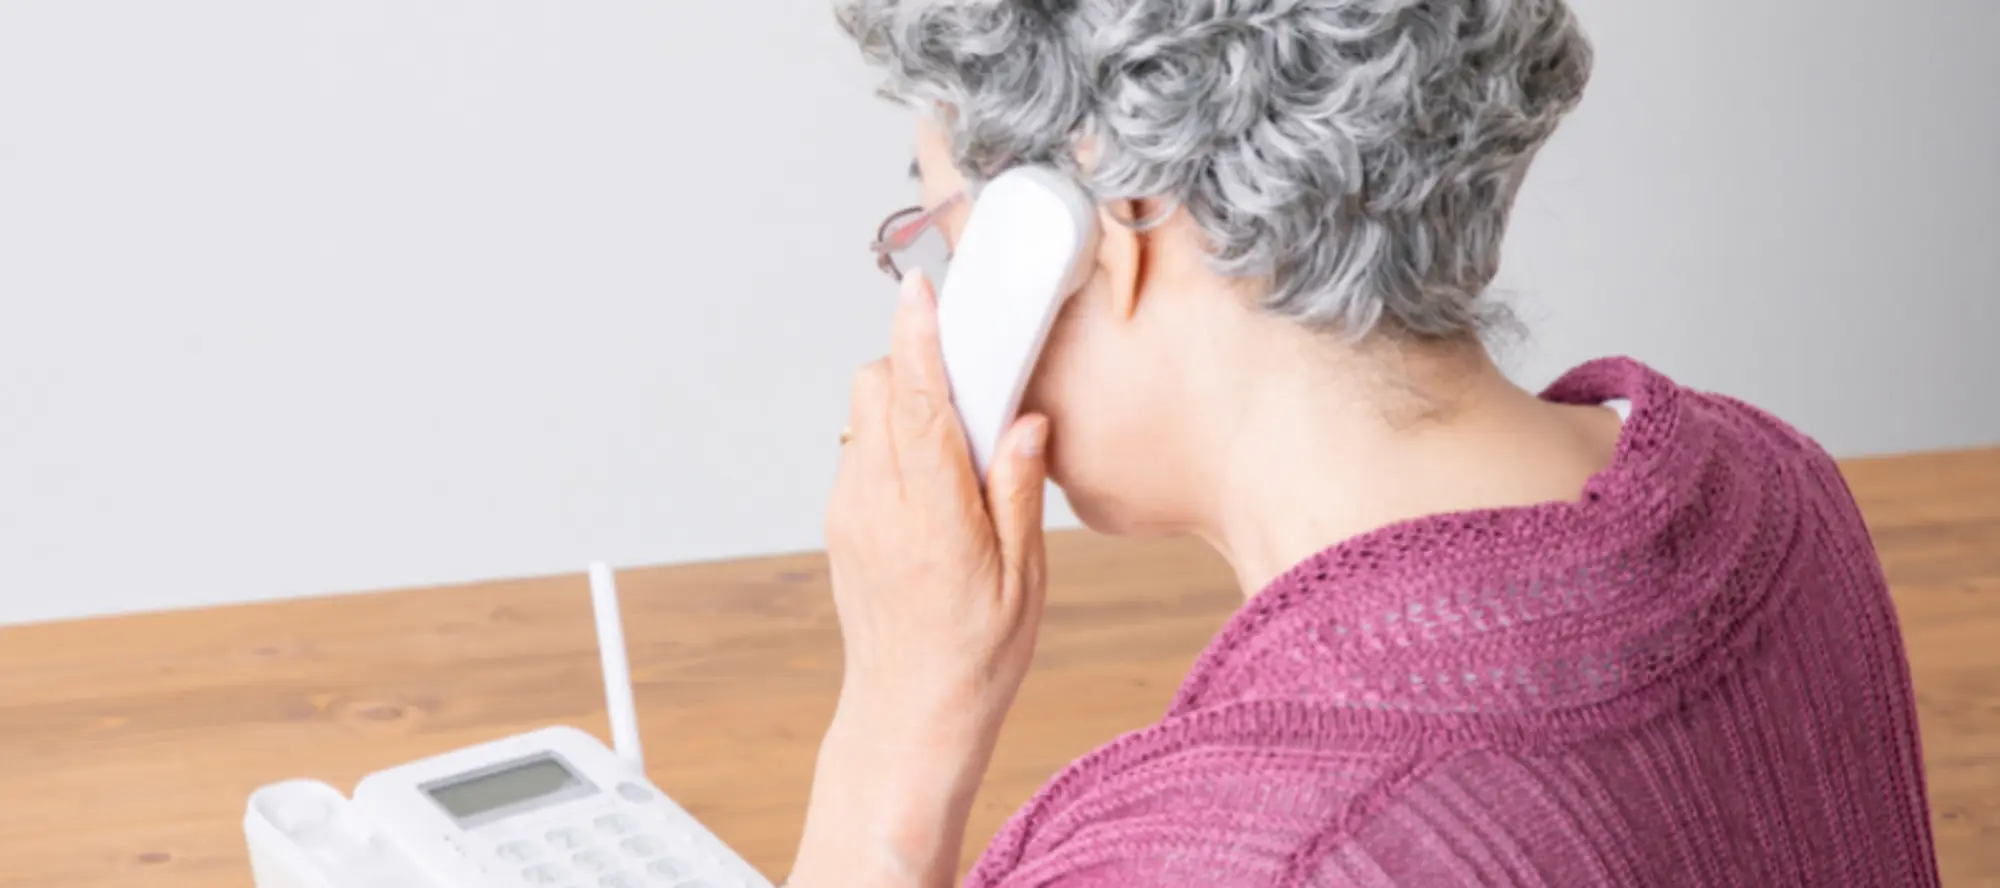 Calling elderly patient about medication